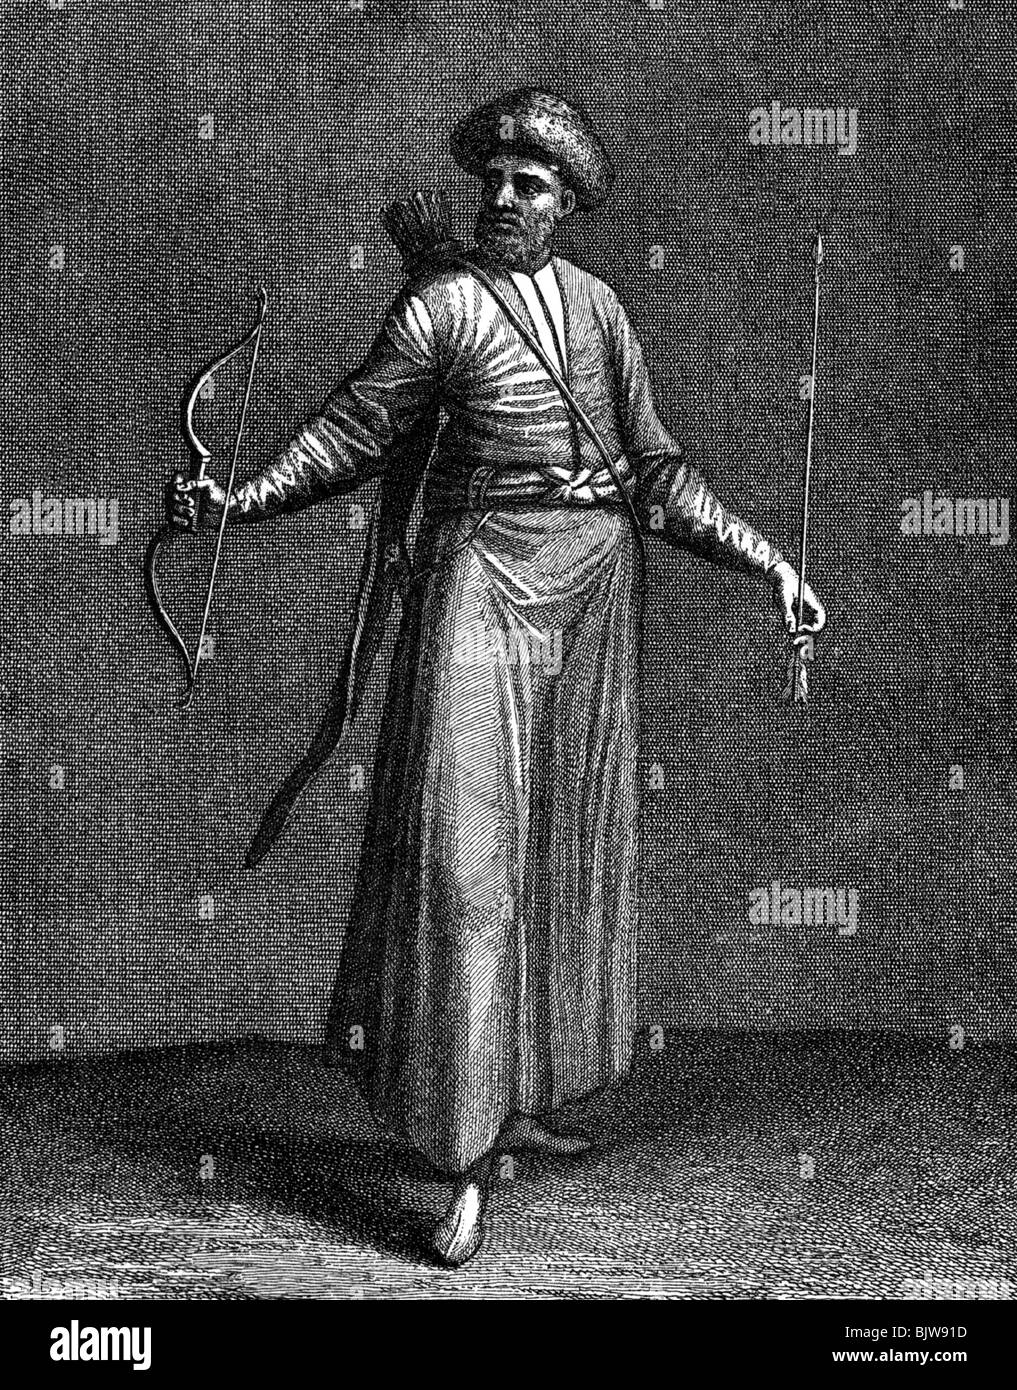 geography / travel, Russia, people, Crimean tatar, copper engraving, 18th century, historic, historical, traditional costume, national costume, dress, traditional costumes, national costumes, dresses, Crimea, arrow, arrows, bow and arrow, full length, archer, bow hunter, bowman, archers, bow hunters, bowmen, Stock Photo